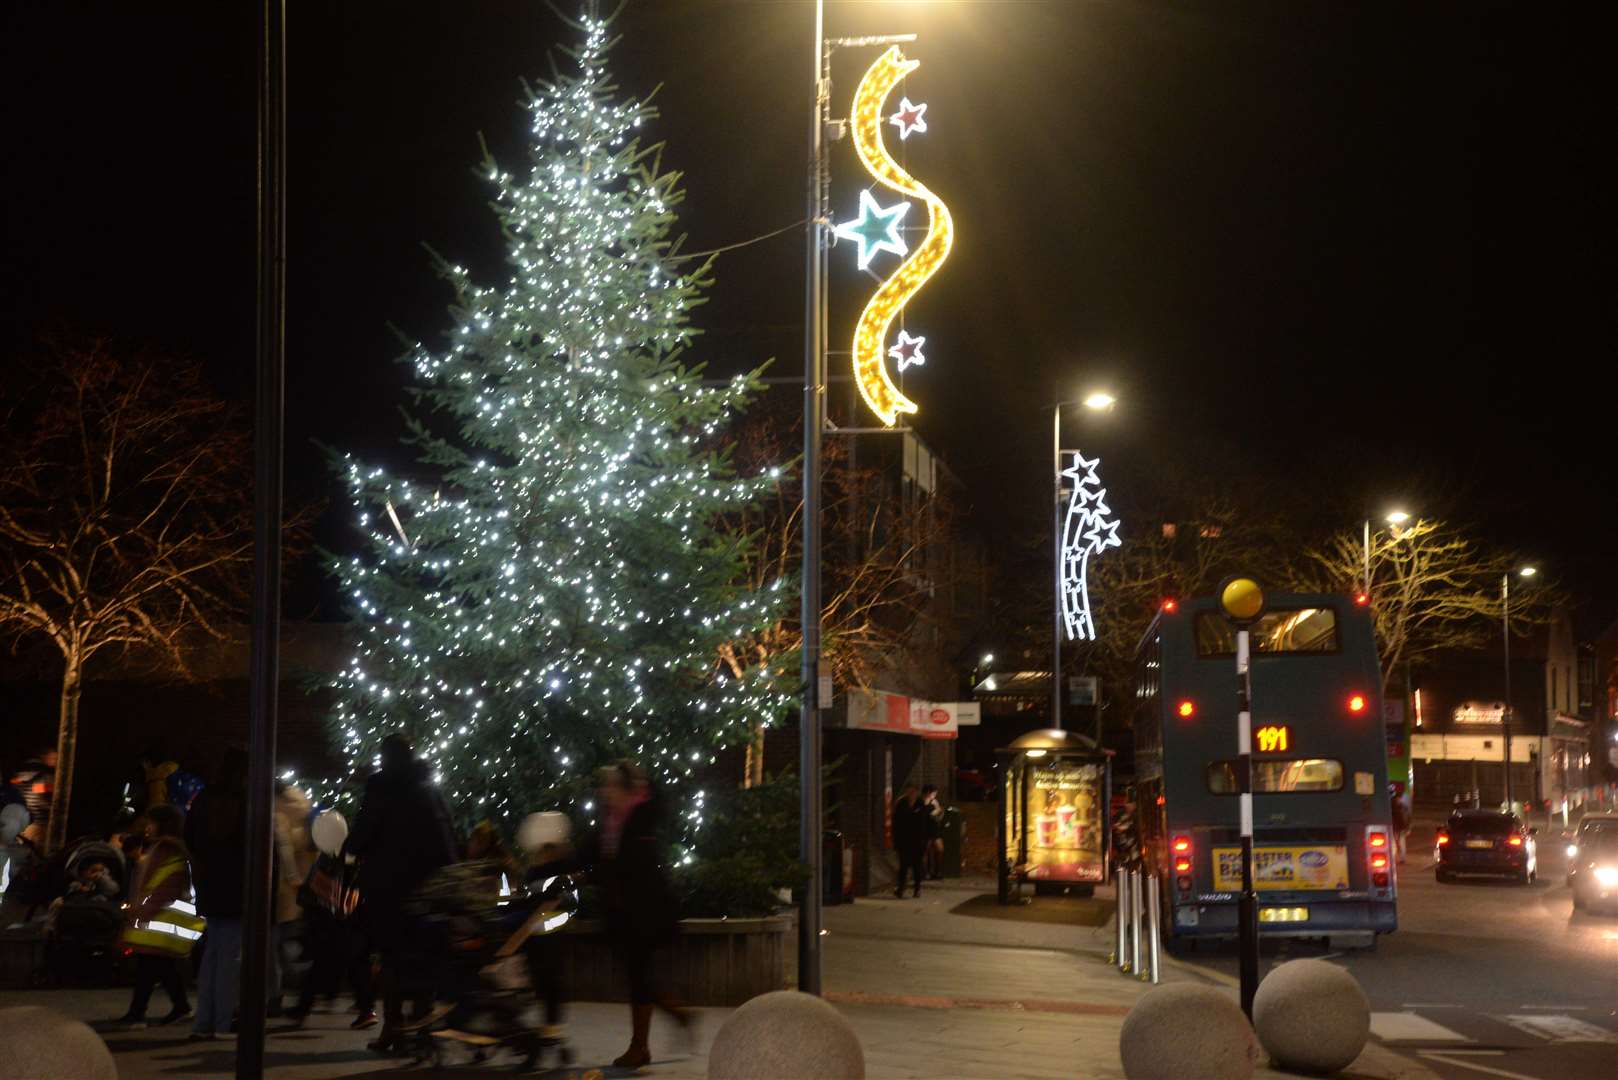 The Christmas lights in Strood last year. Picture: Chris Davey